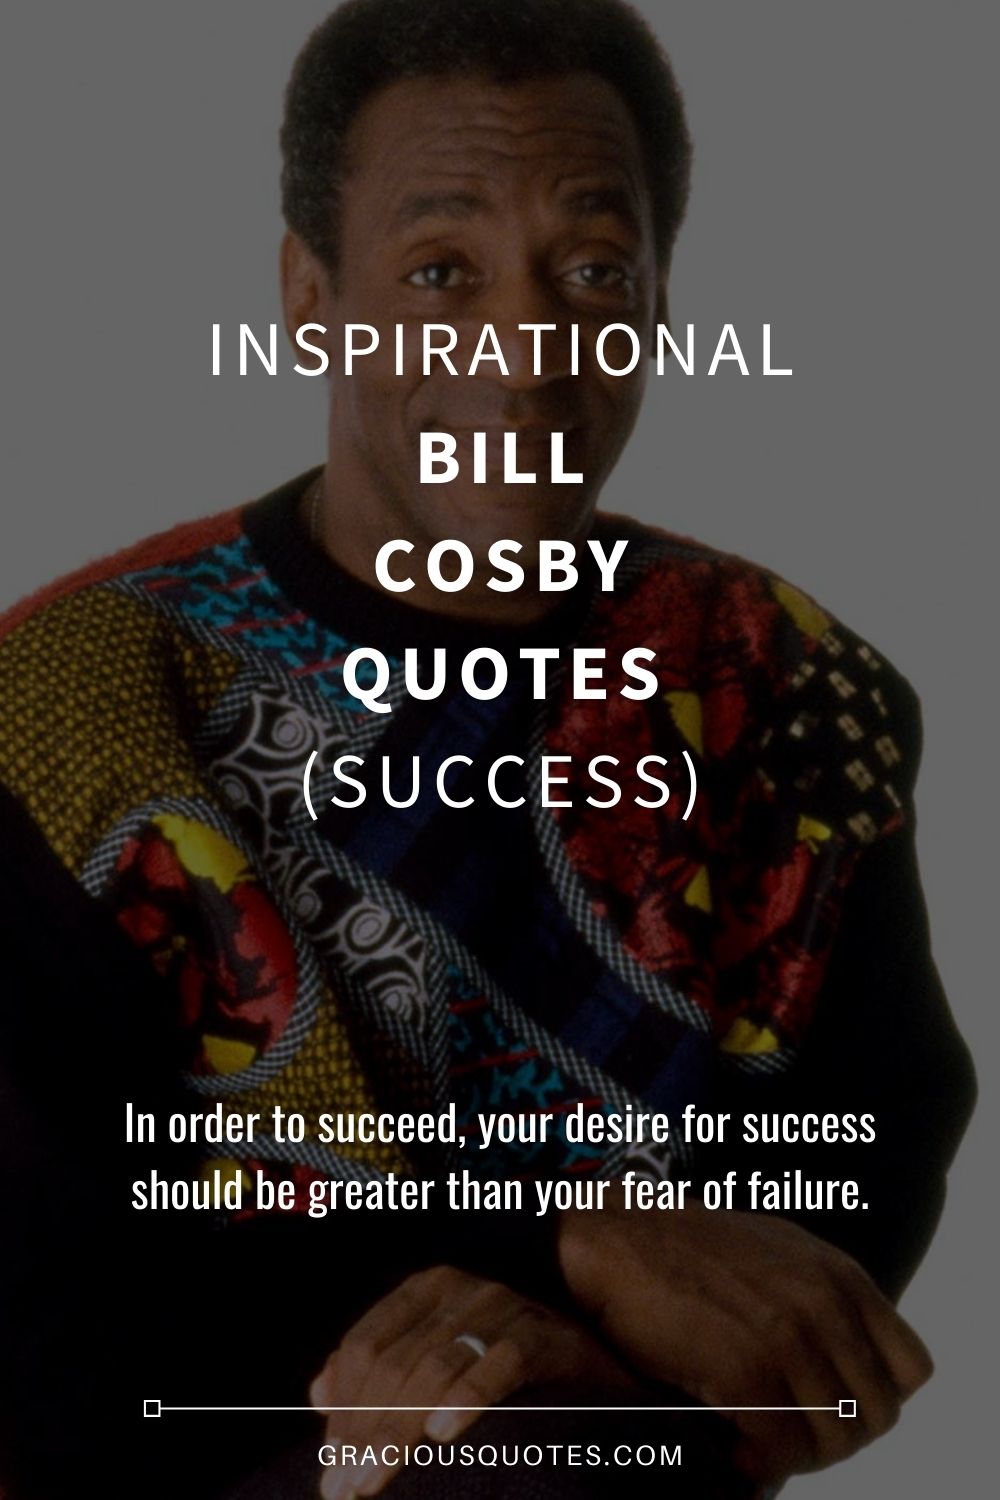 Inspirational Bill Cosby Quotes (SUCCESS) - Gracious Quotes